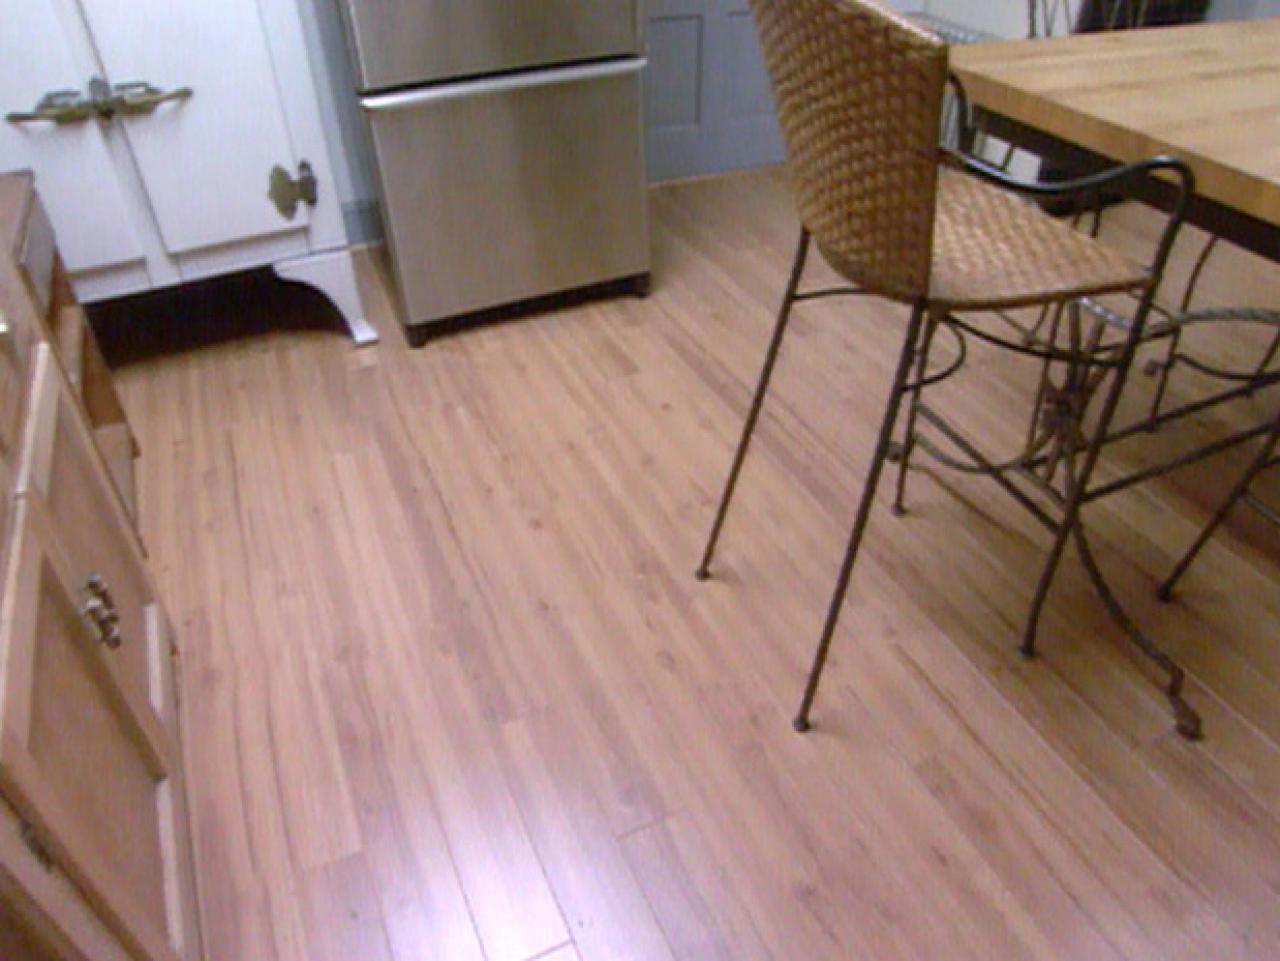 How To Install Laminate Flooring, Which Direction To Lay Laminate Flooring In Kitchen